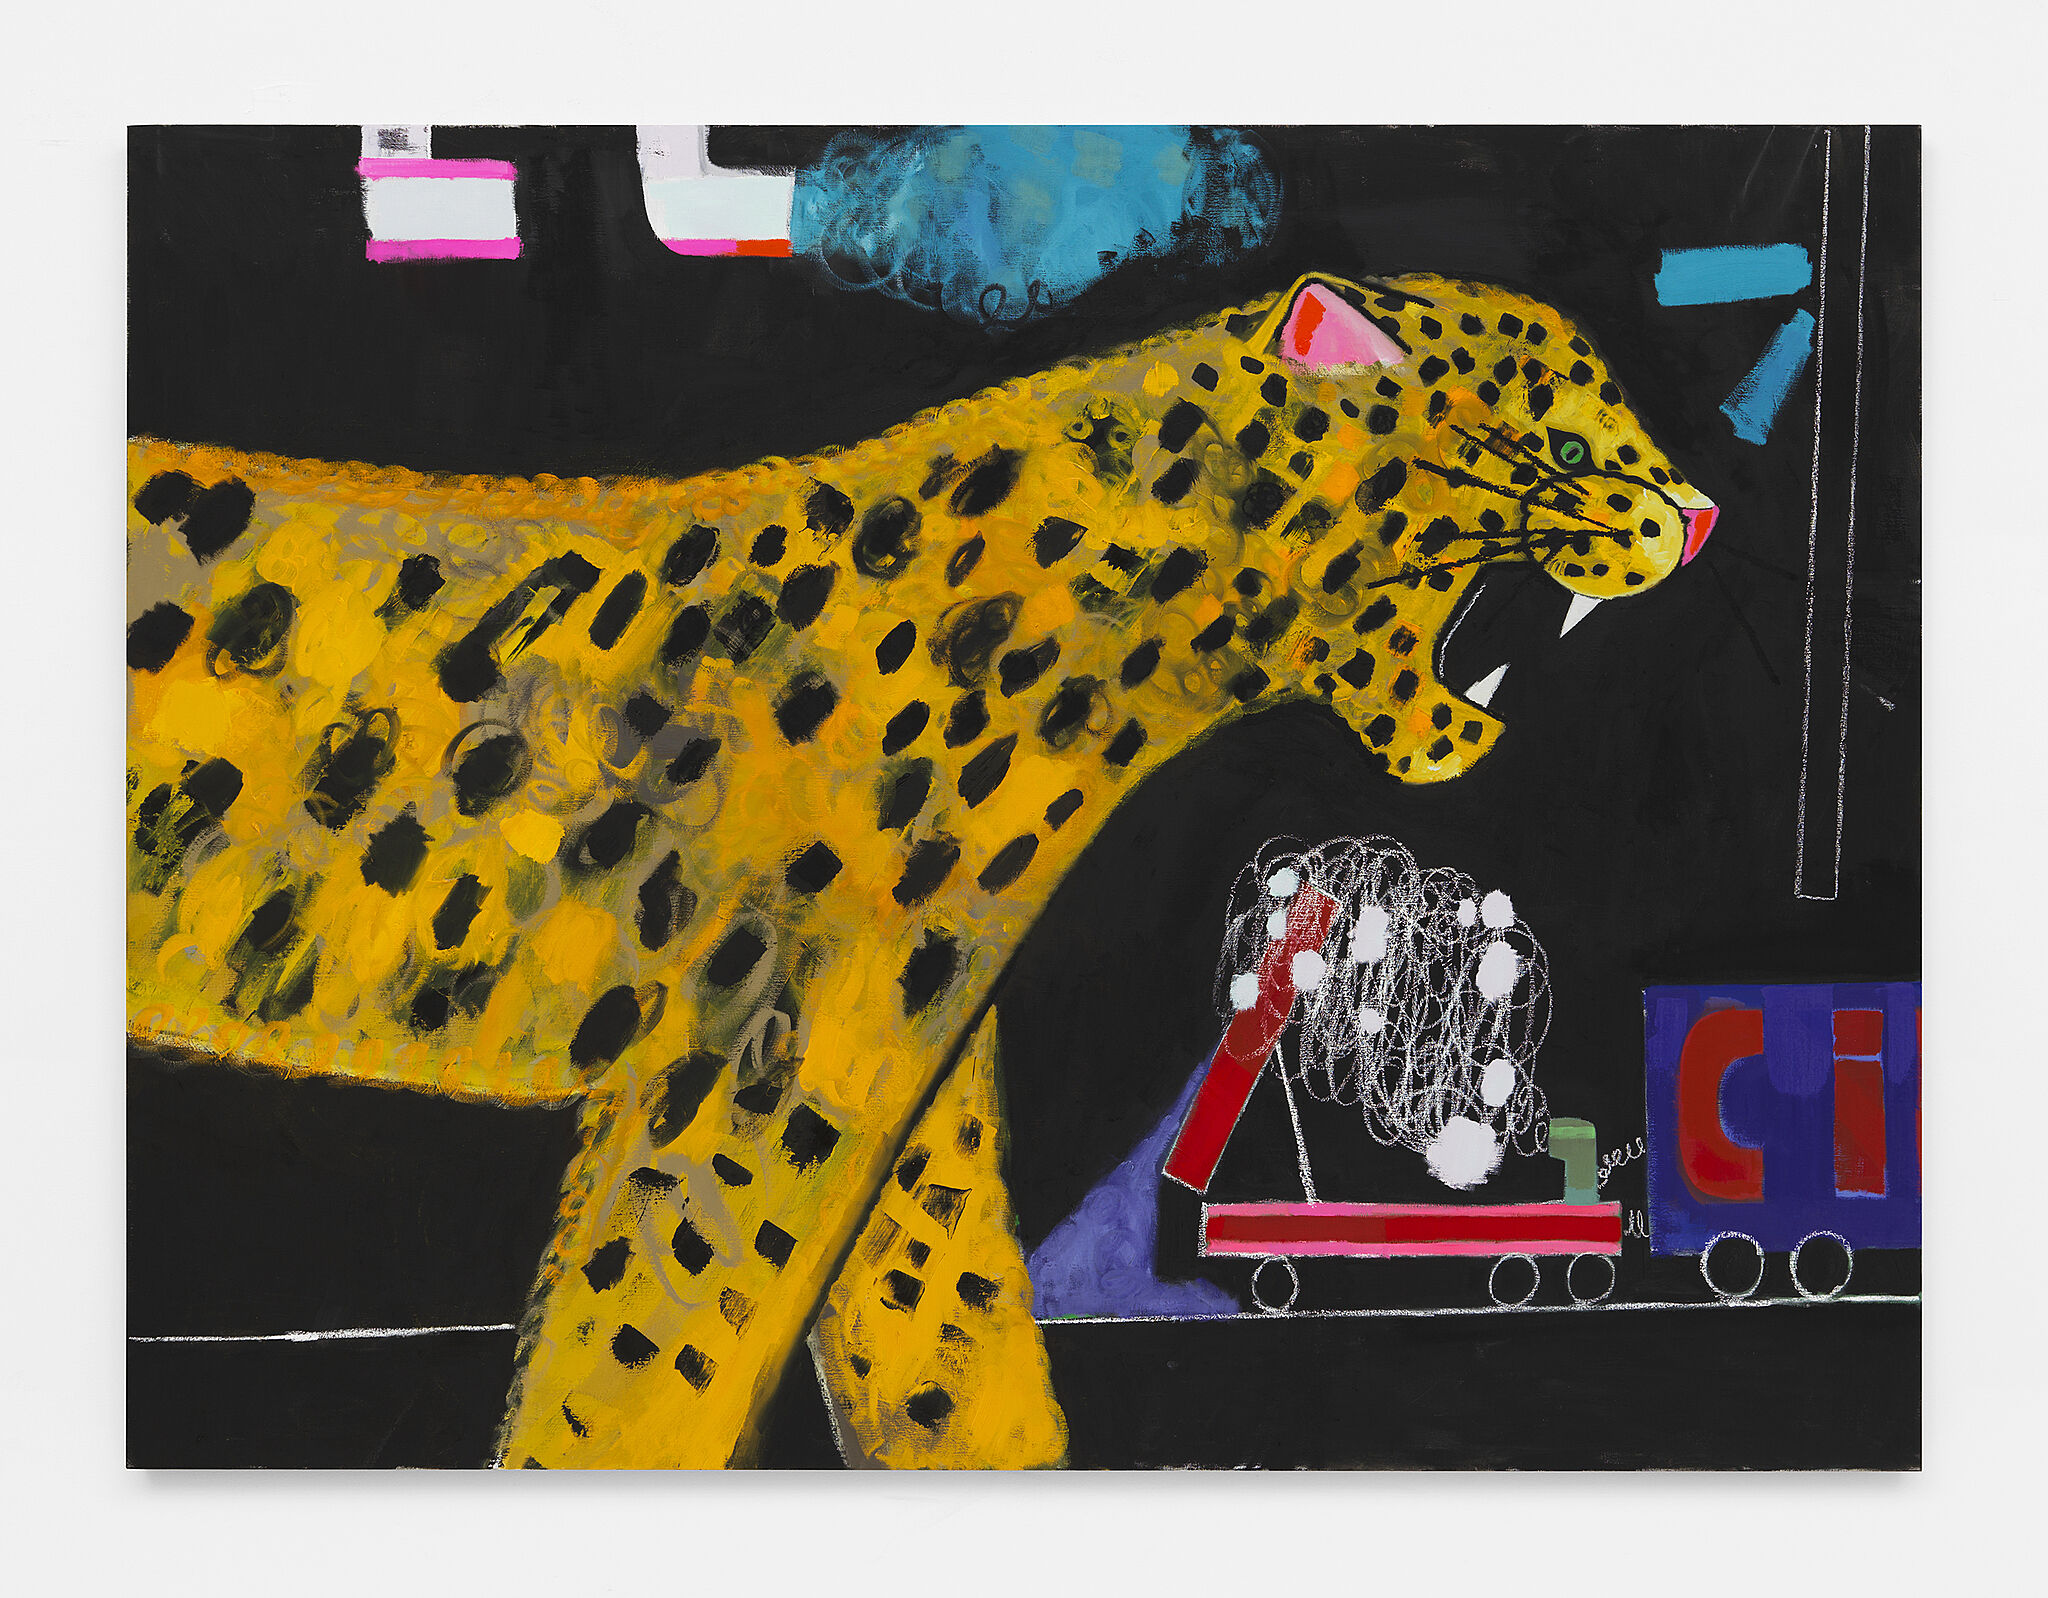 A painting depicting a cheetah on a black background with organic and geometric shapes.